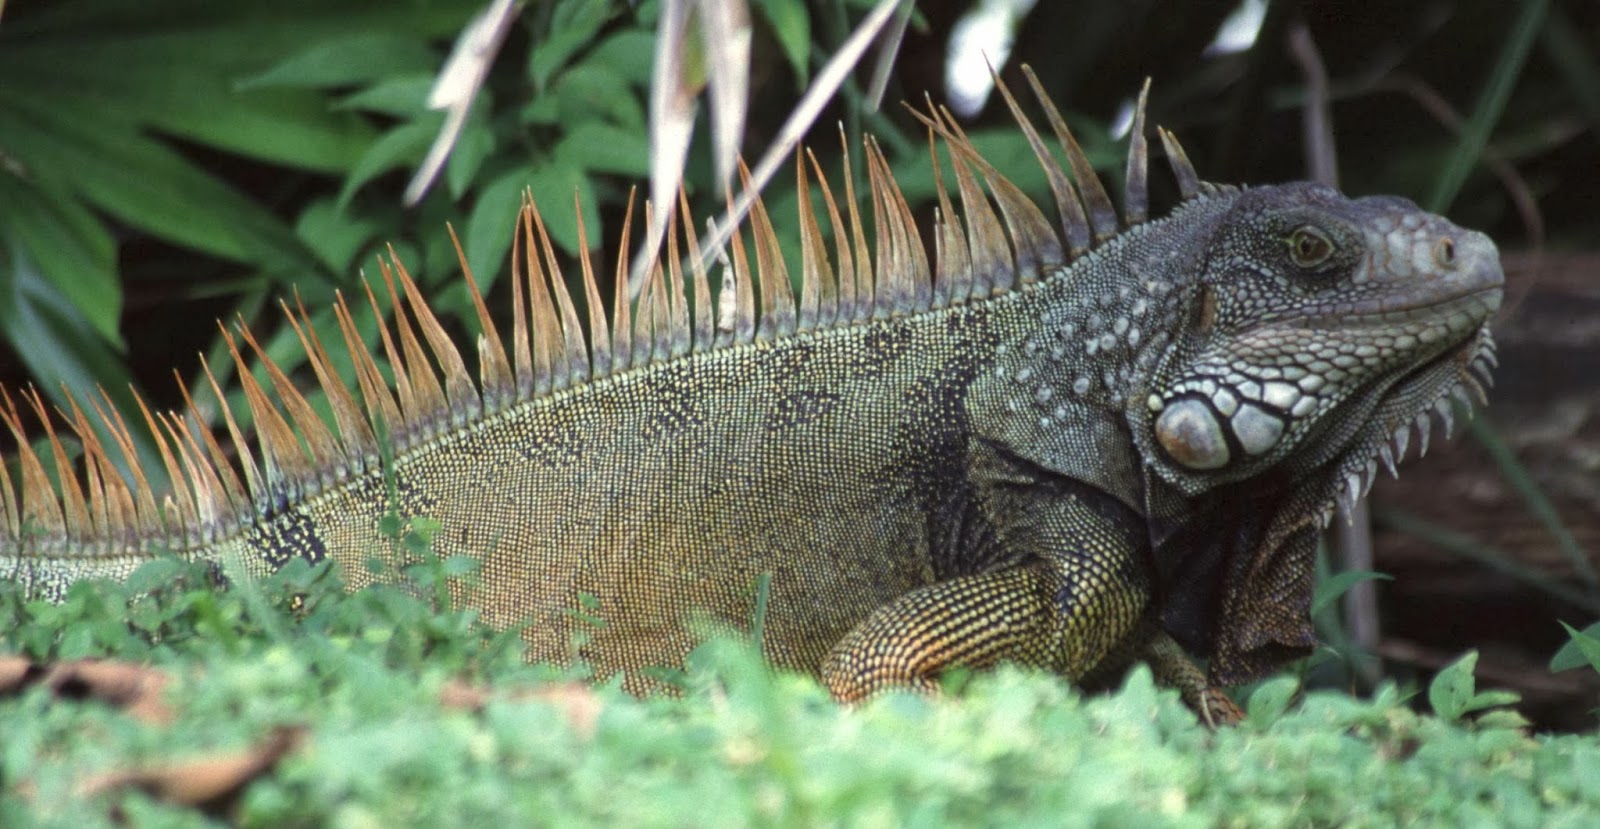 All About Our Pets: Are Iguanas a good choice for a pet?